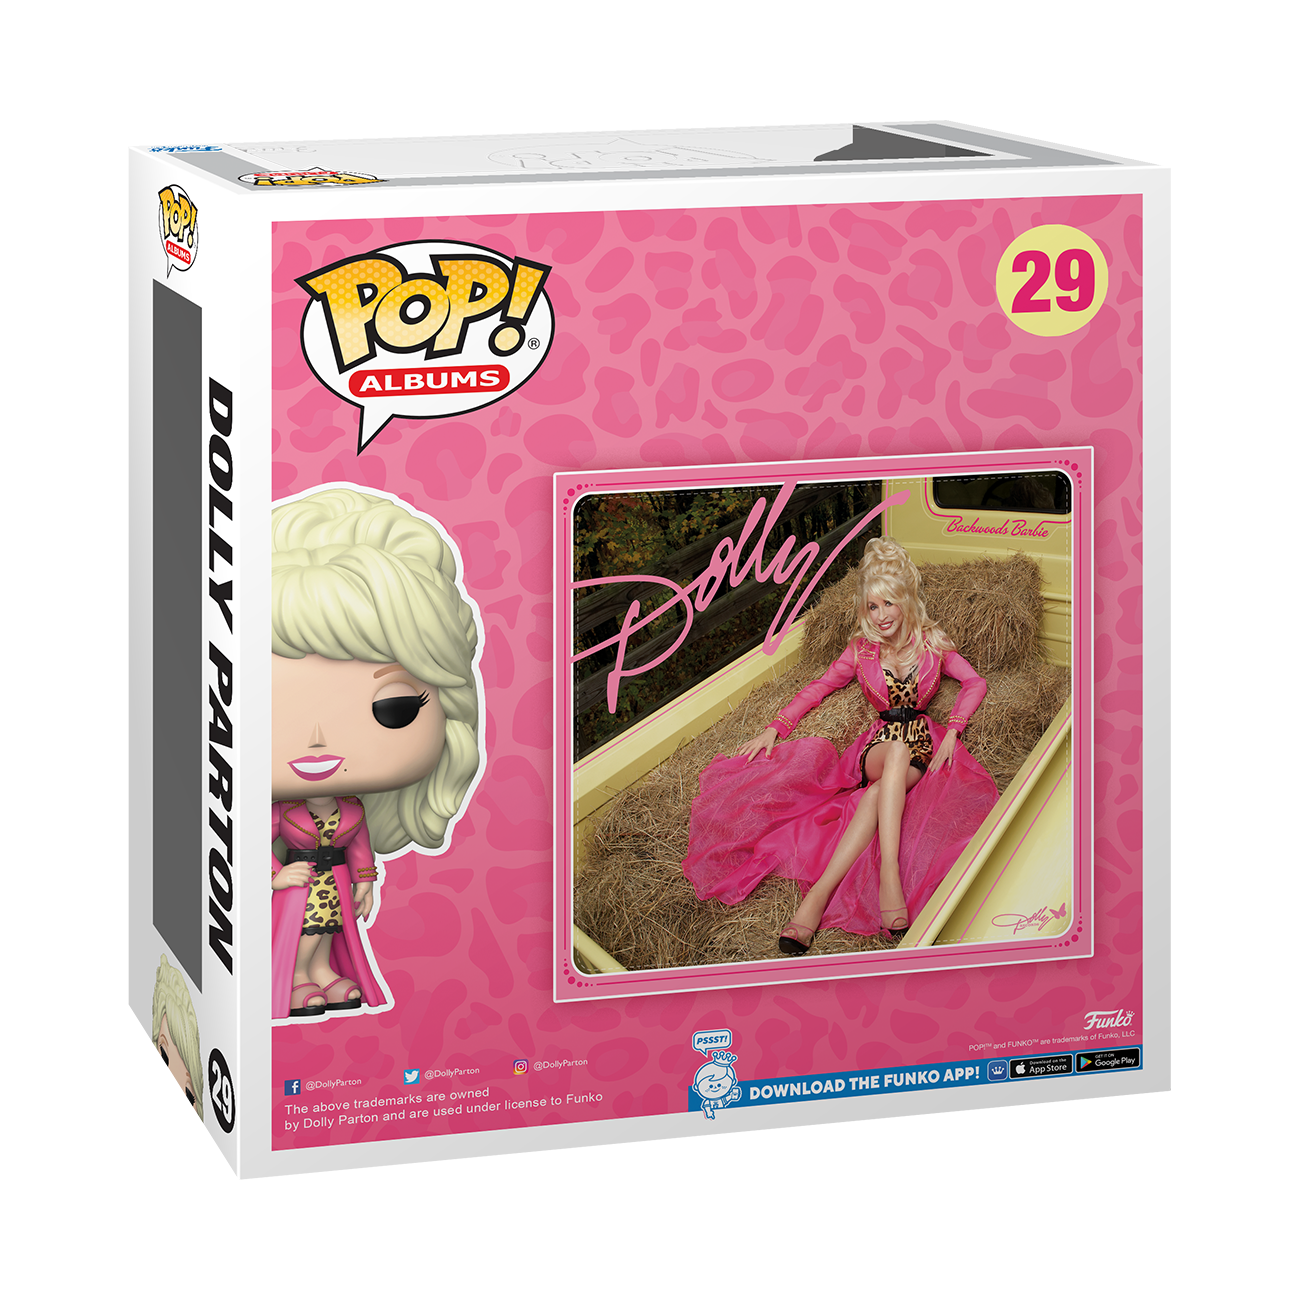 Funko Pop Dolly Parton dolls celebrate Hall of Fame performer